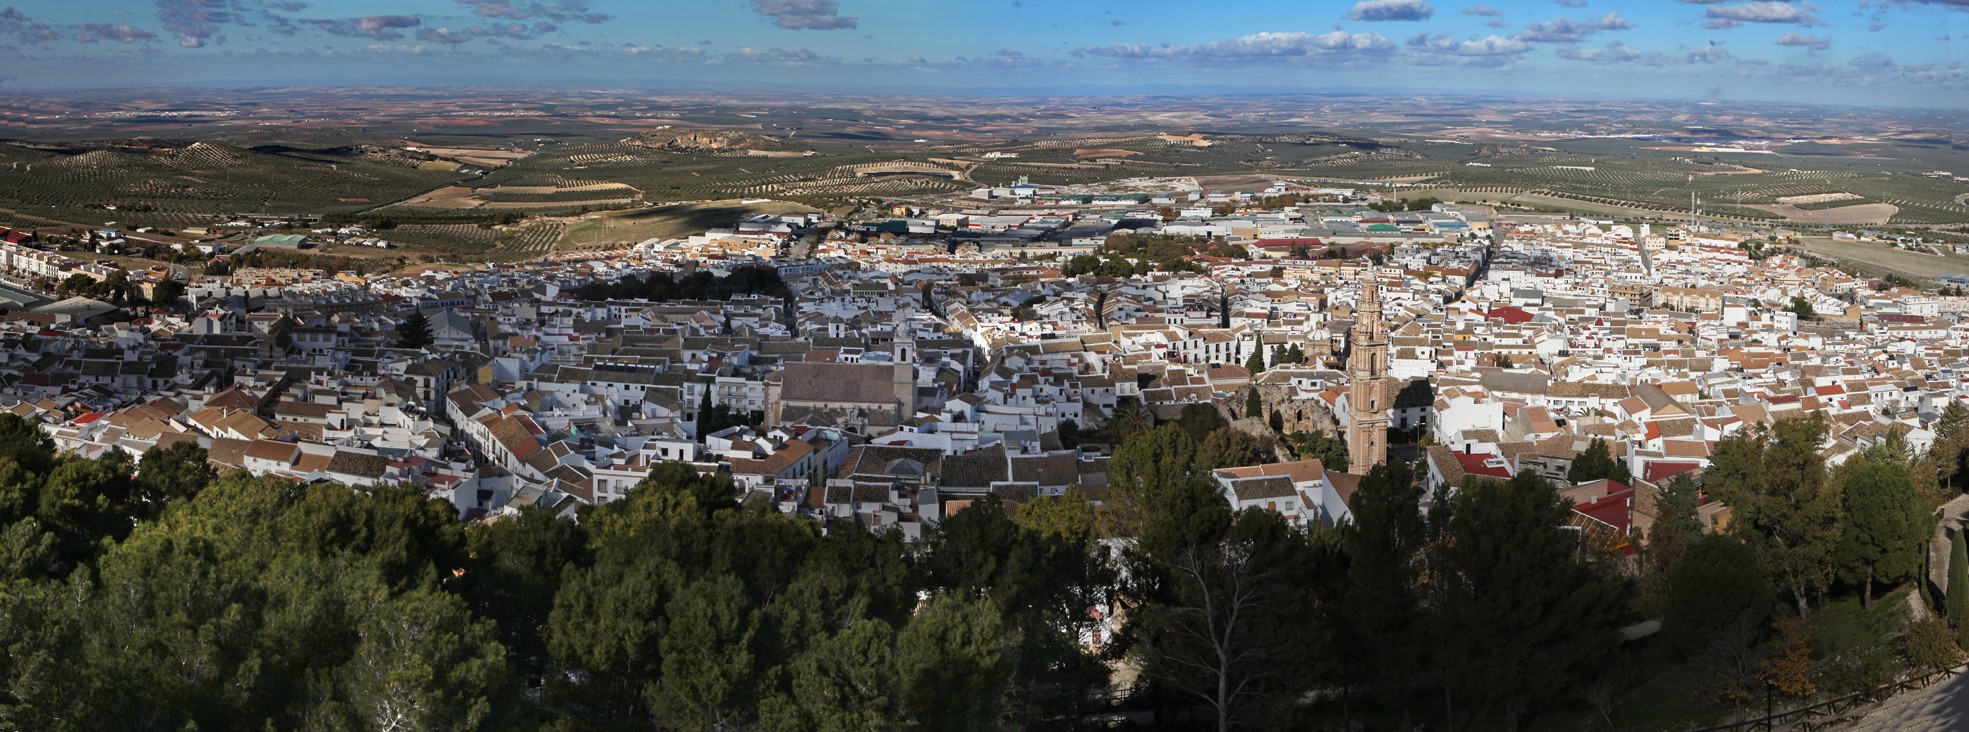 This Spanish city pays everyone 1,200 euros a month and gives everyone a free house